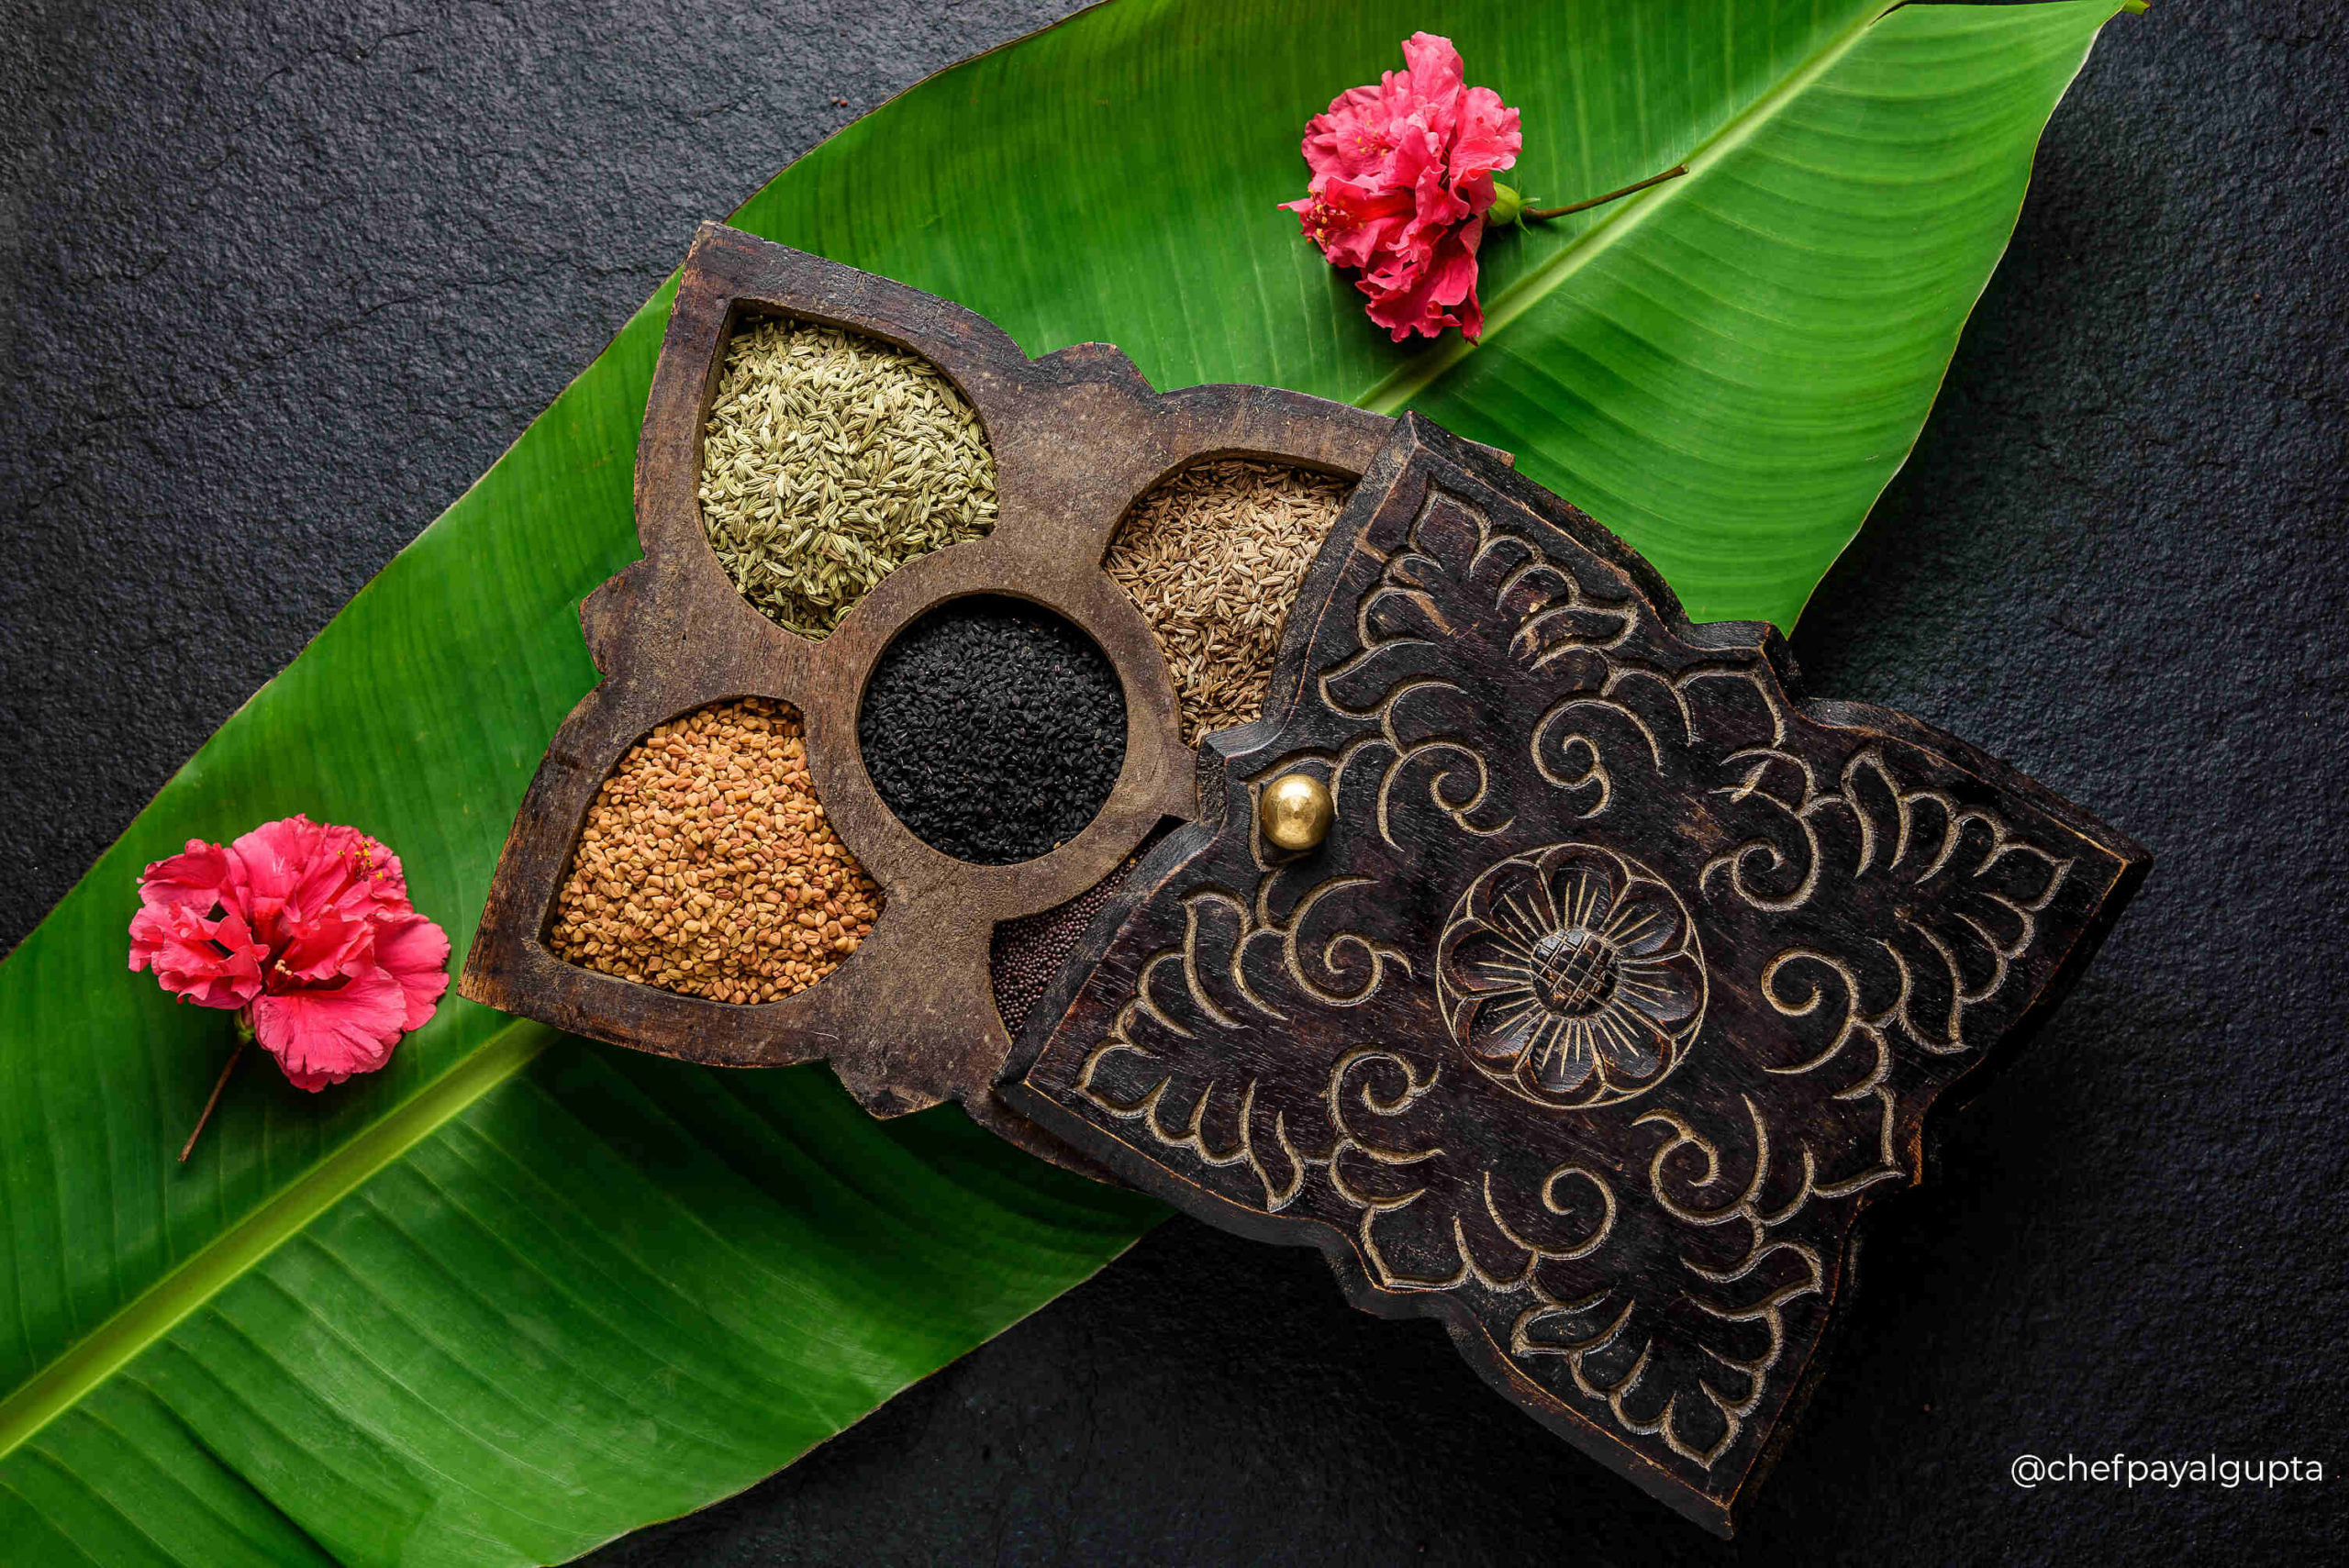 Bengali spices aroma, texture and taste are known in the world and is very famous. It consist of basic spices like jeera, mystard seeds, dhaniya, etc. to make the dish more tasty.